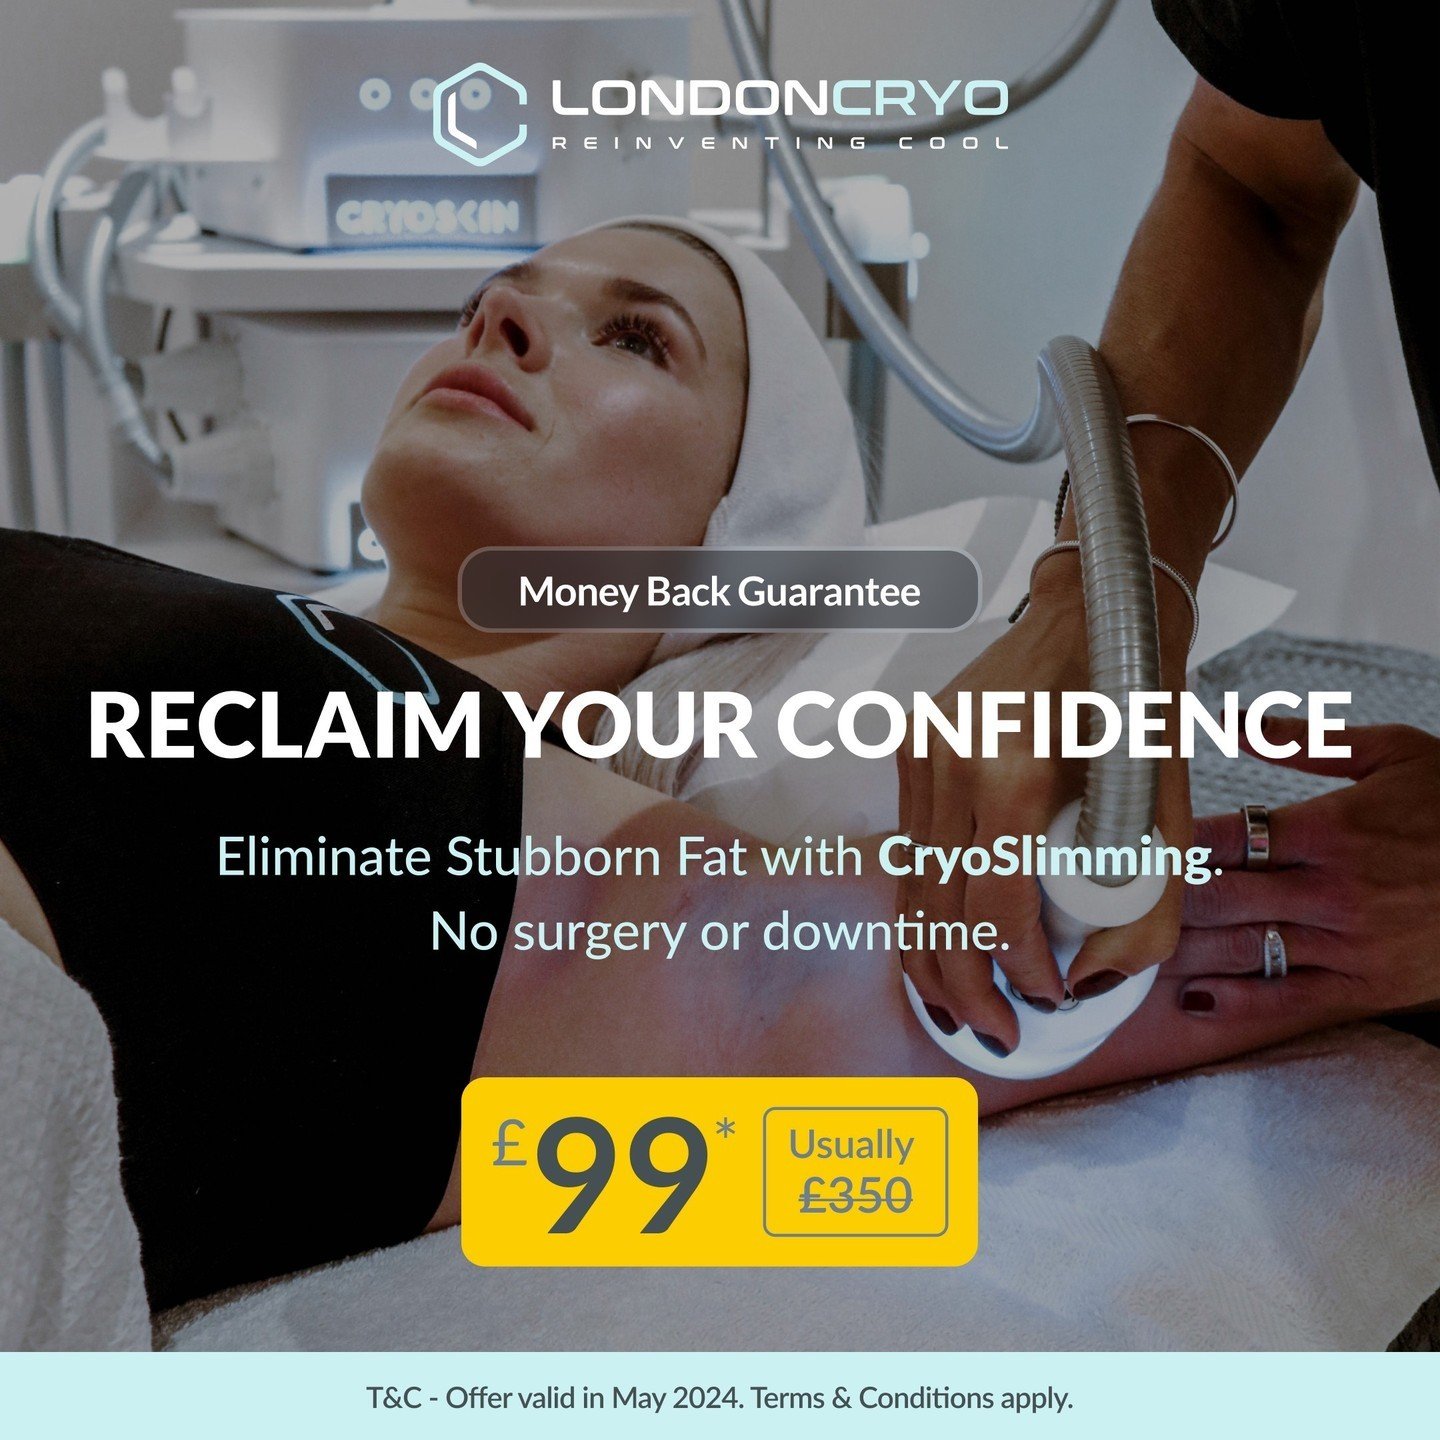 ✨ Reclaim Your Confidence ✨⁠
⁠
Say goodbye to stubborn fat with CryoSlimming! ❄️✨⁠
⁠
Experience the ultimate body transformation with no surgery or downtime. For just &pound;99 (usually &pound;350), you can sculpt your dream physique with our CryoSli